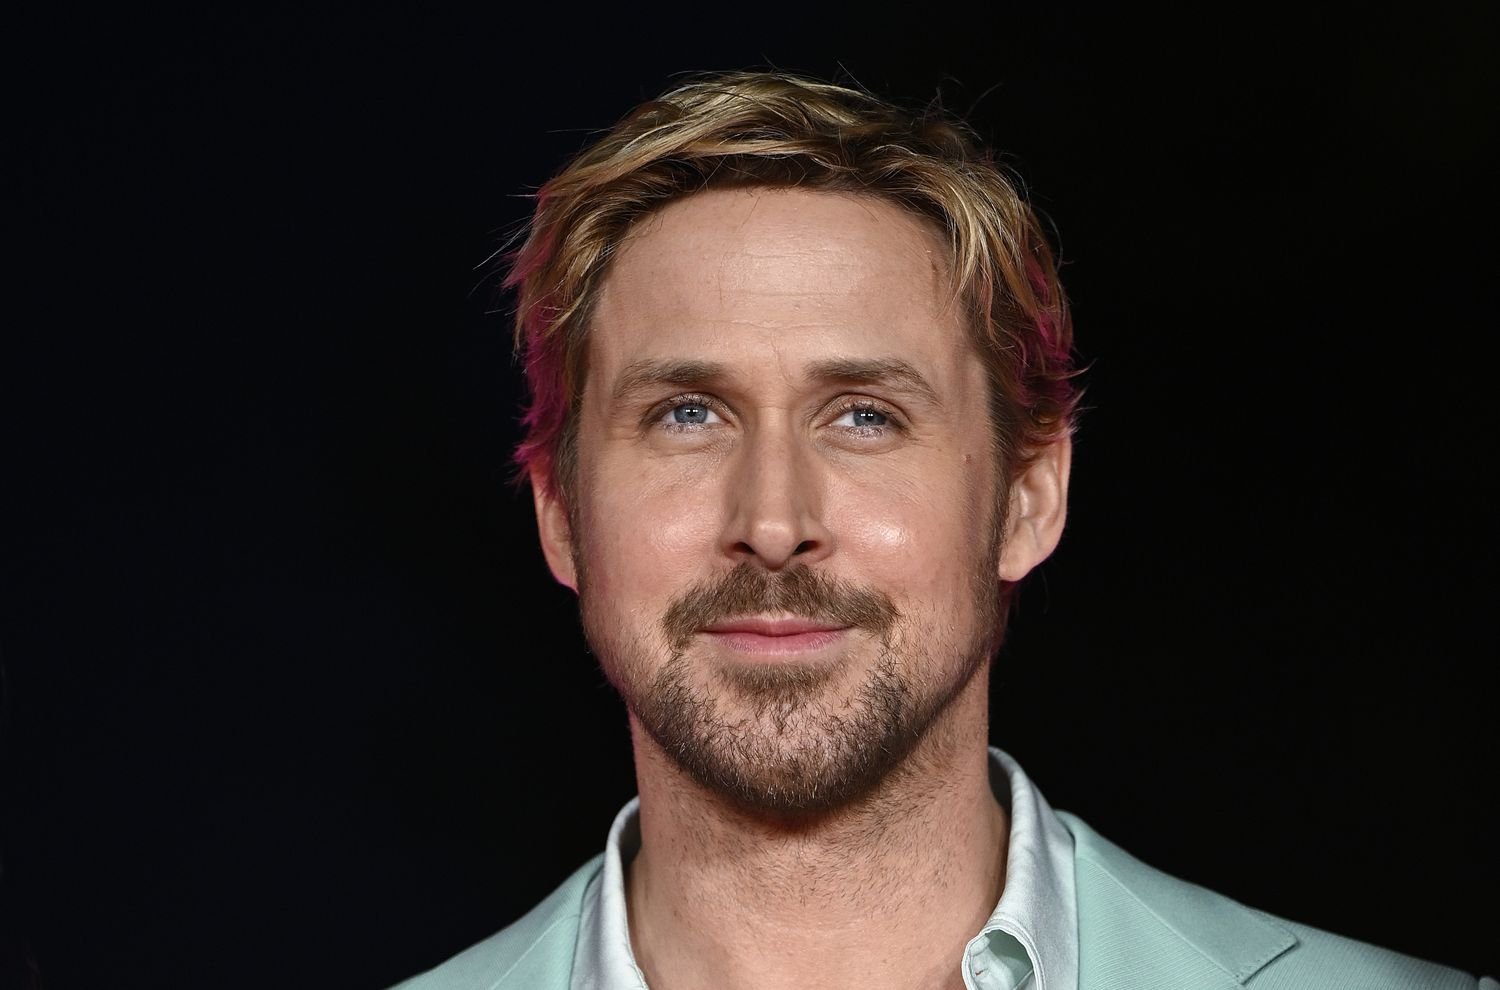 Ryan Gosling Says His Kids Were “Confused” About Why He’d Want to Play Ken in ‘Barbie’